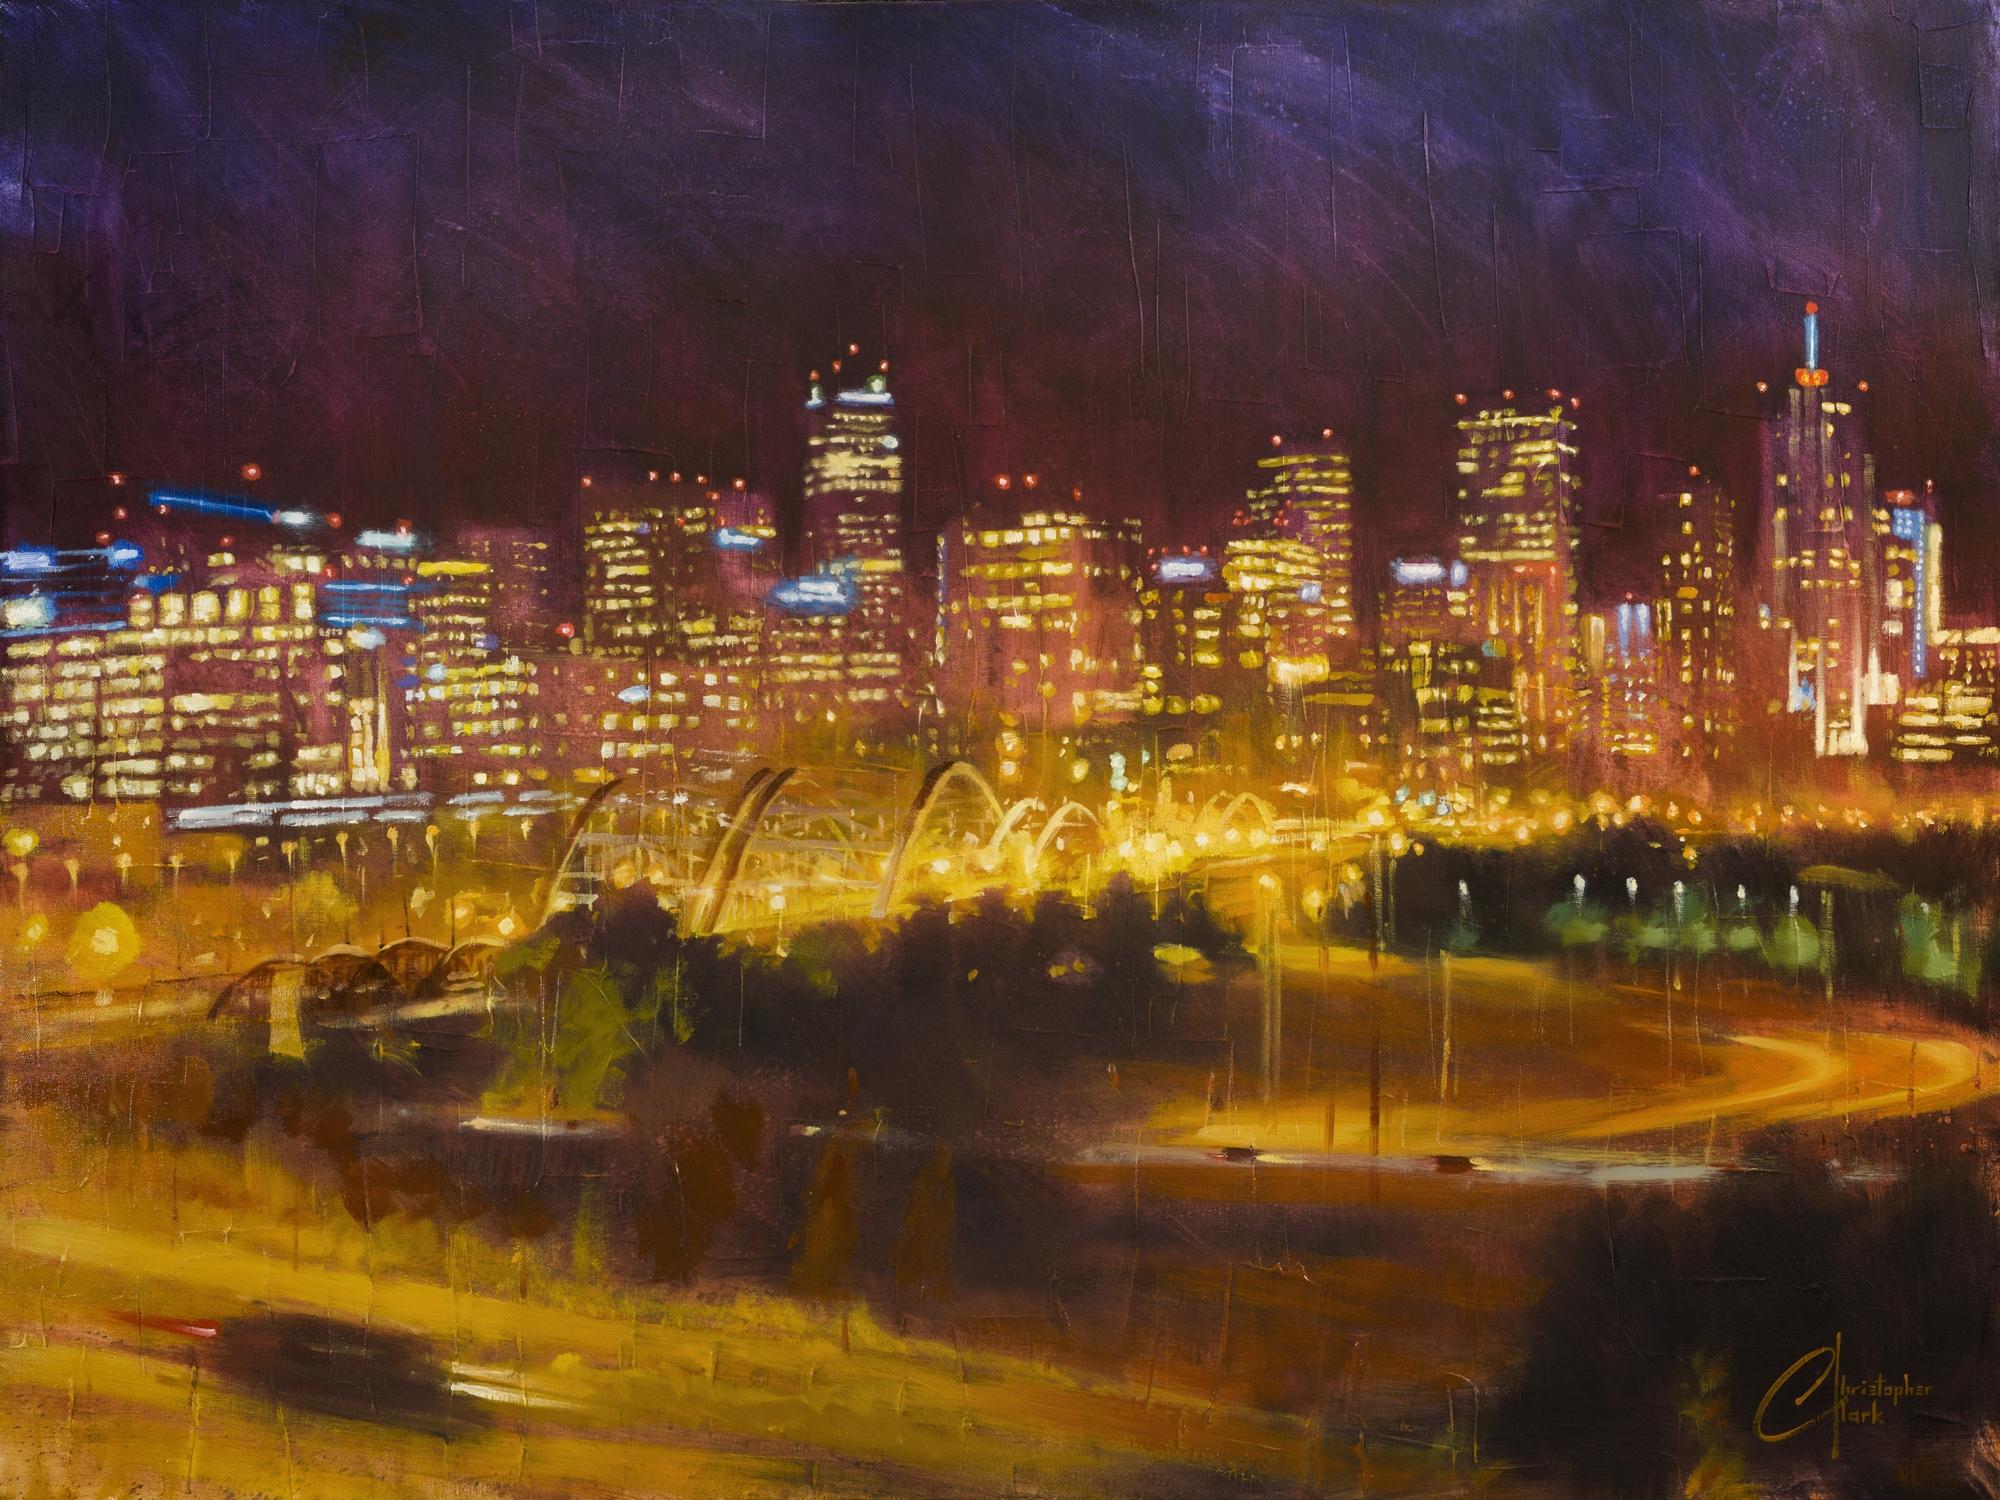 Christopher Clark Figurative Painting - Denver Skyline from Speer and 23rd Ave at Night